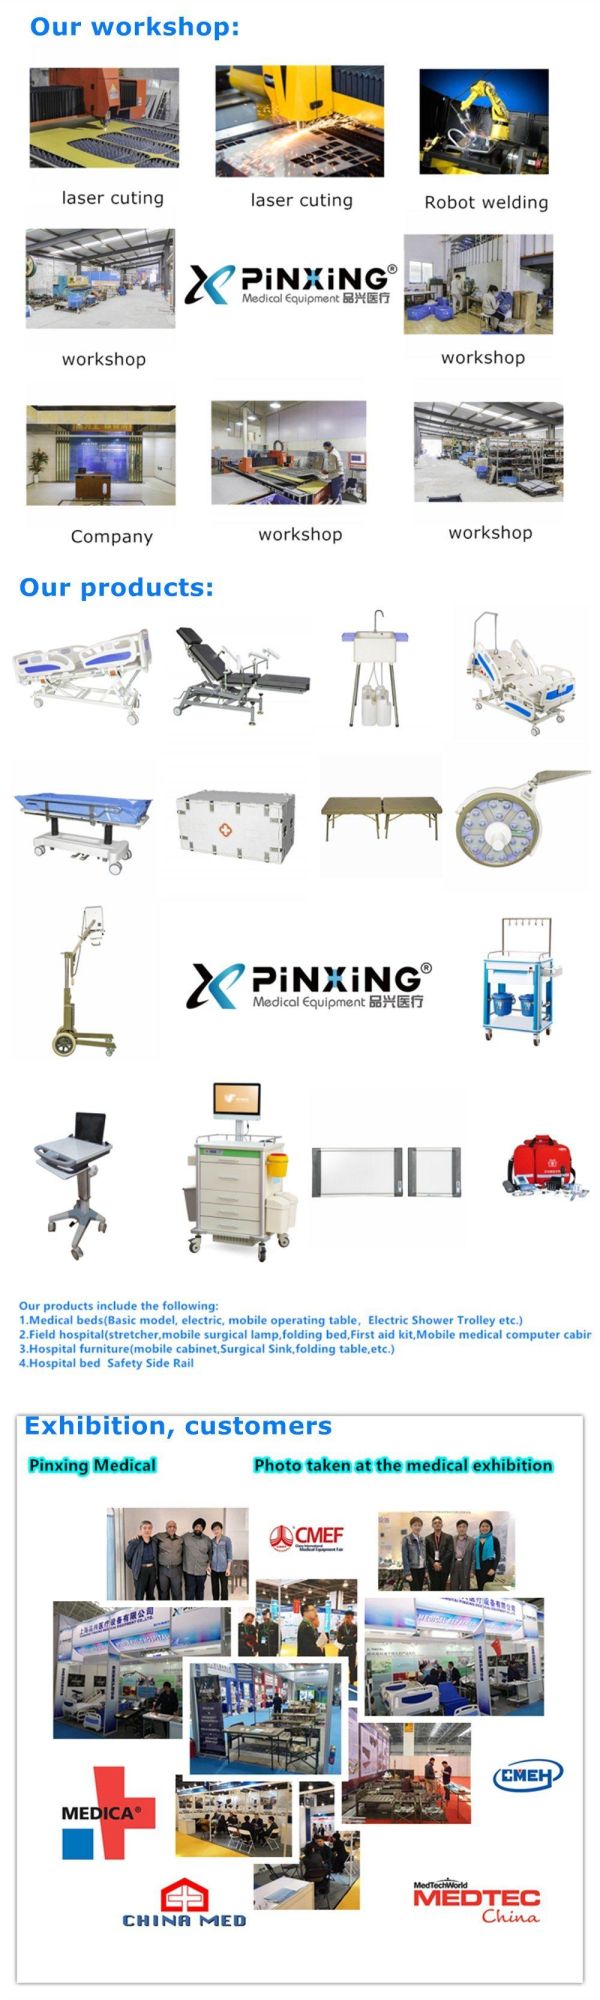 Customized Practical Premium Quality CE Certified Hospital Beds for Sale